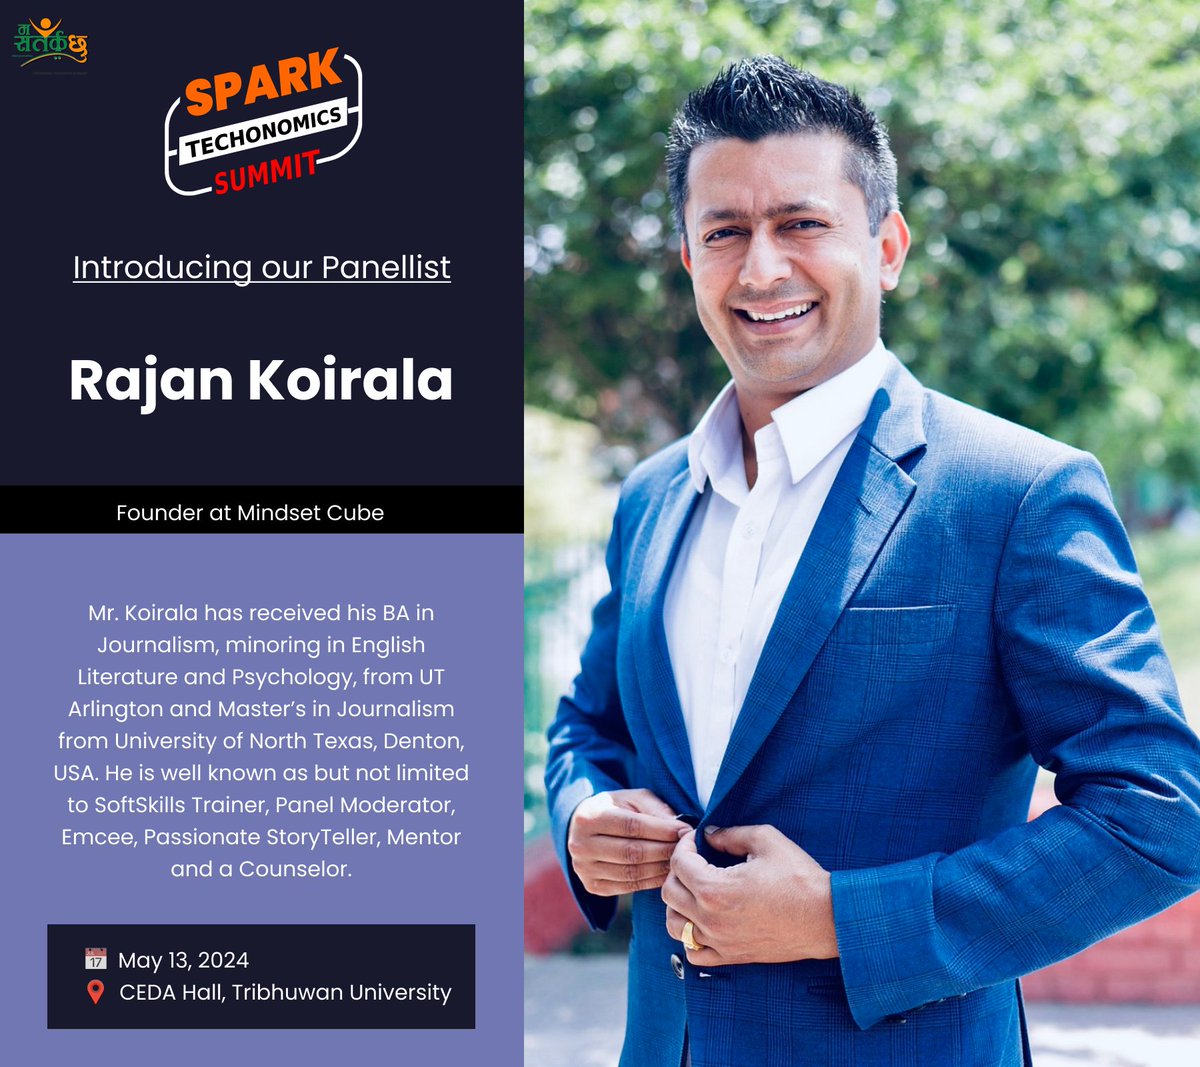 Welcome Rajan Koirala to Spark Techonomics Summit! 📷 As the founder of Mindset Cube and a communications enthusiast. #TechonomicsSummit #Leadership Participation Registration Form: bit.ly/sts-join StartUp Presentation Registration Form: bit.ly/sts-startup